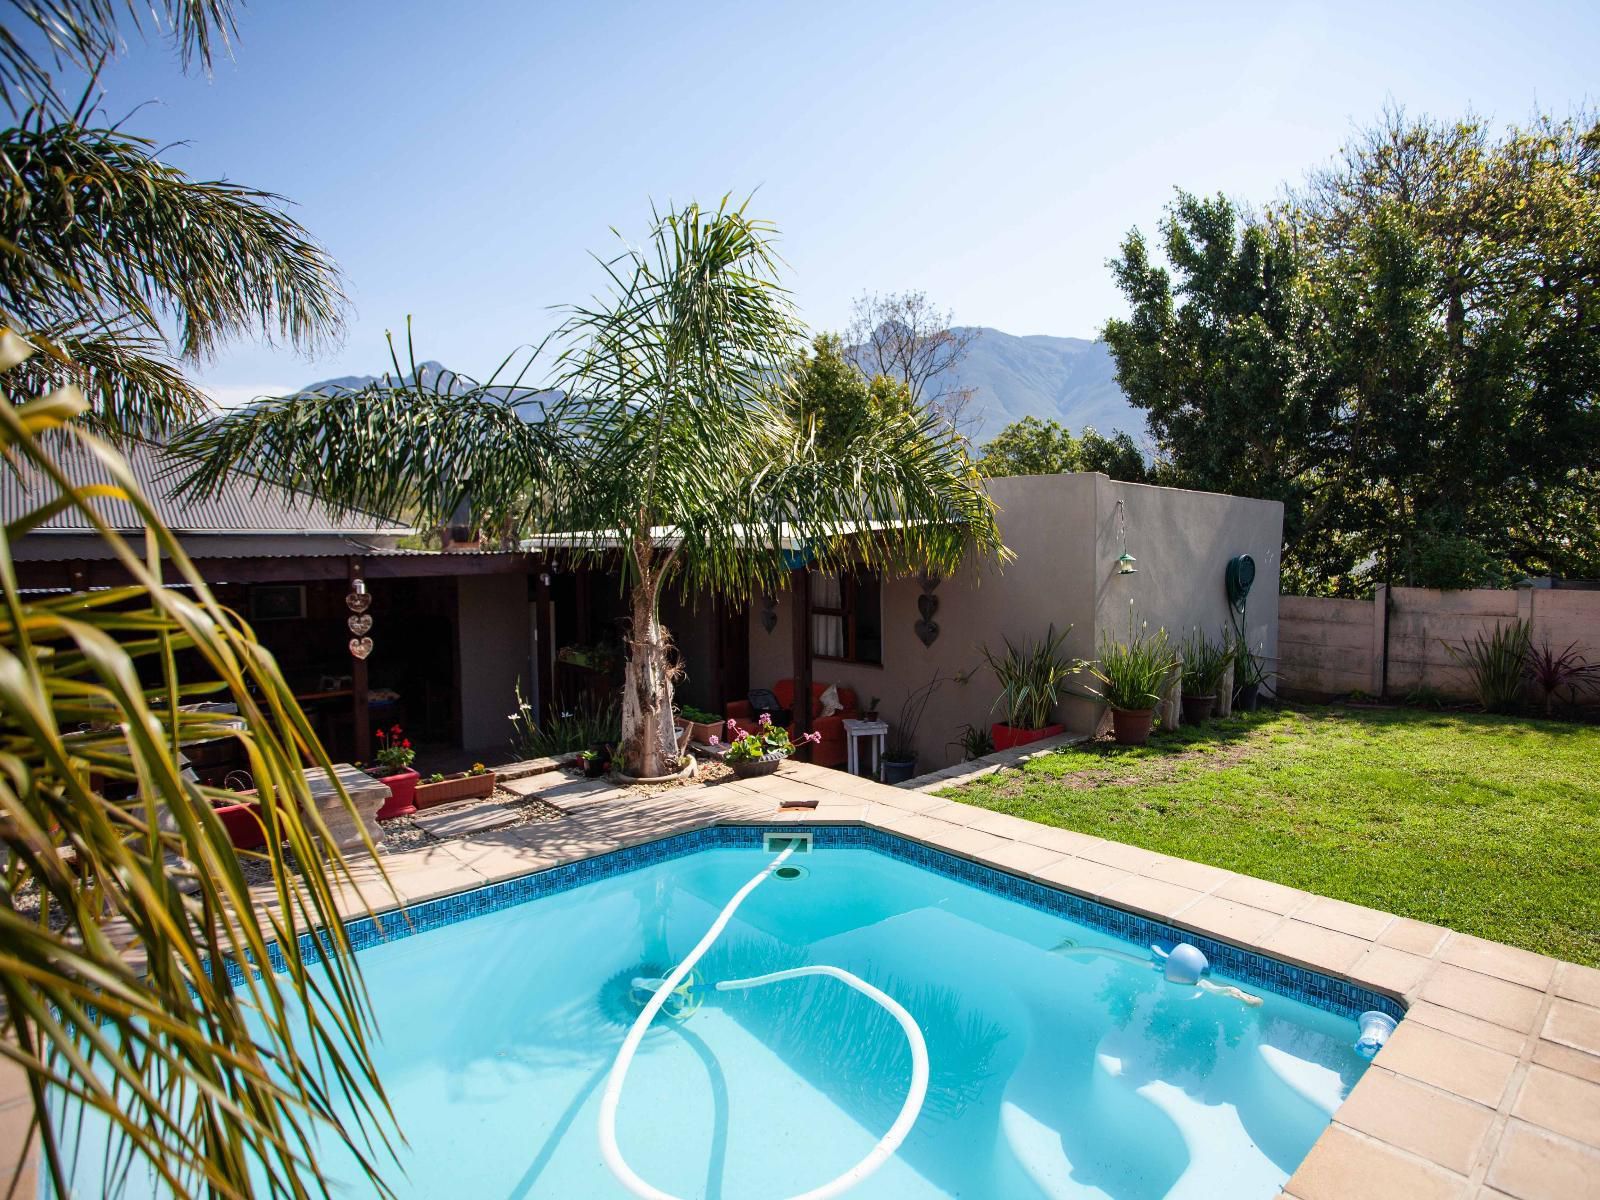 Flametree Guesthouse Swellendam Western Cape South Africa Complementary Colors, House, Building, Architecture, Palm Tree, Plant, Nature, Wood, Swimming Pool